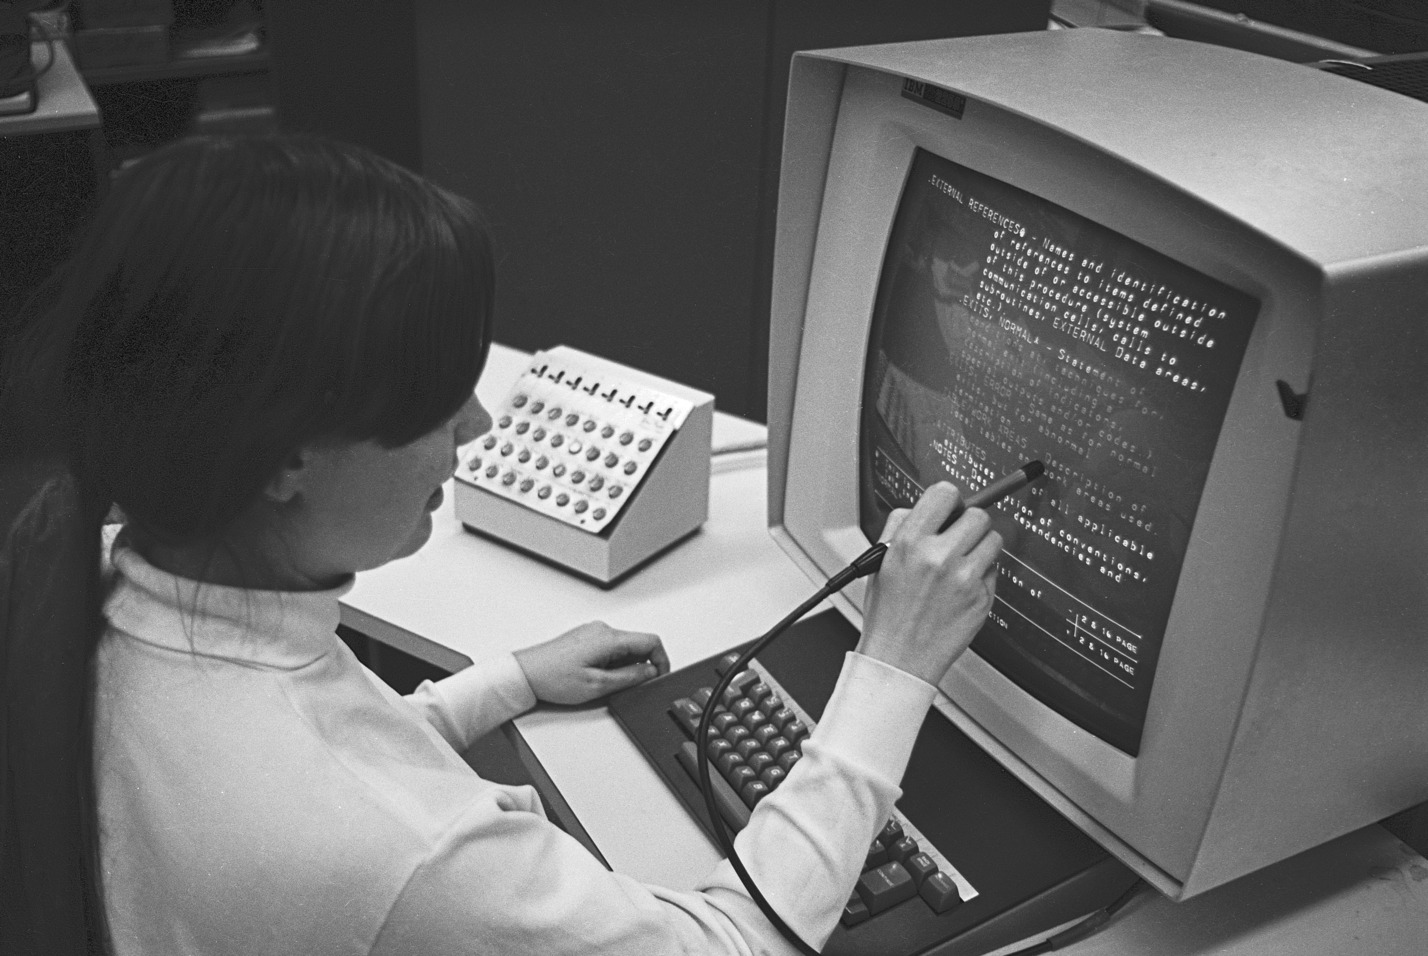 A computer operator using a hypertext editing system in 1969